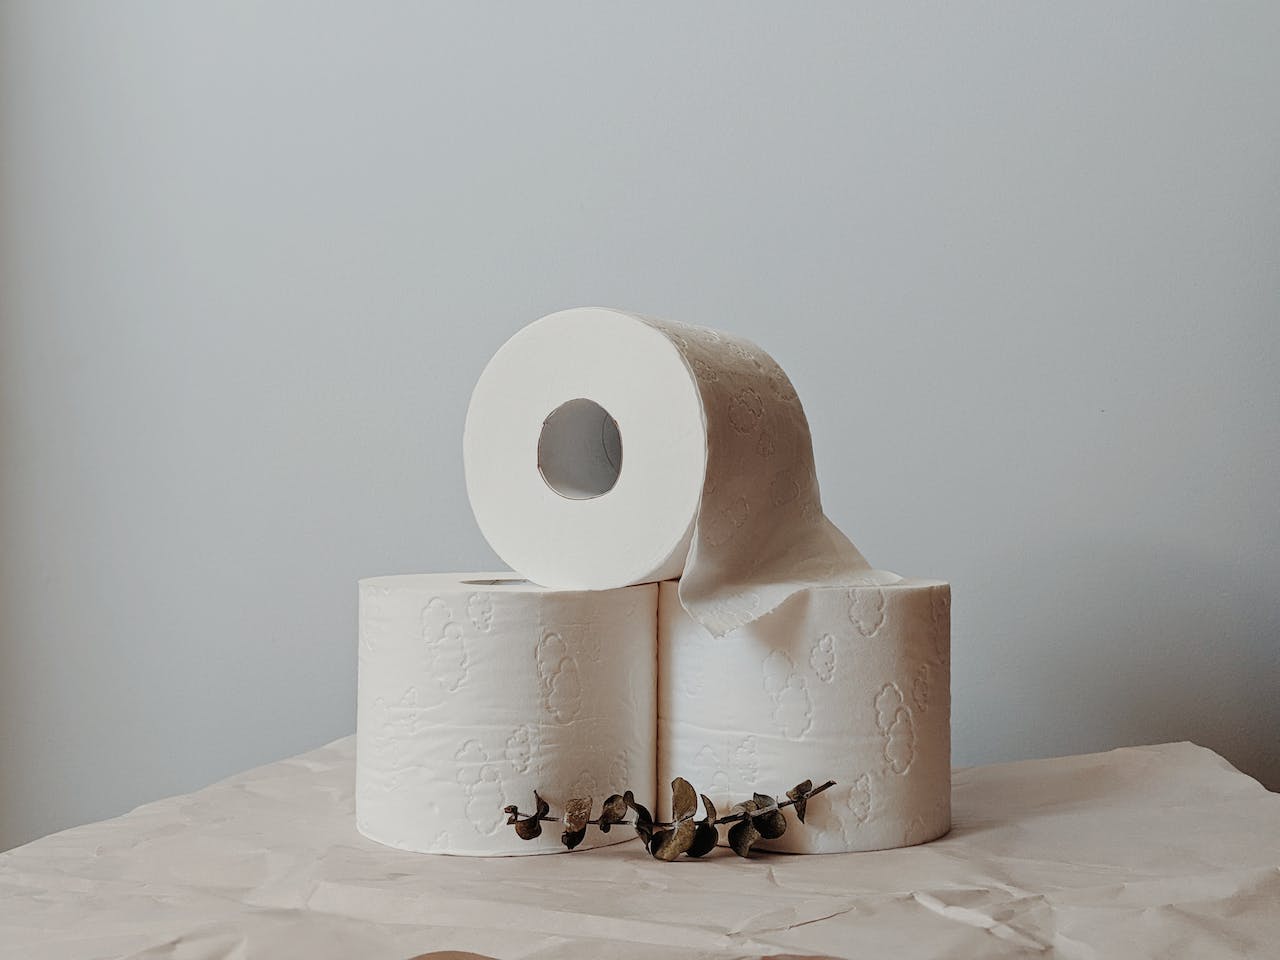 5 Unexpected Health Benefits of Switching to Eco-Friendly Toilet Paper Like Tanki